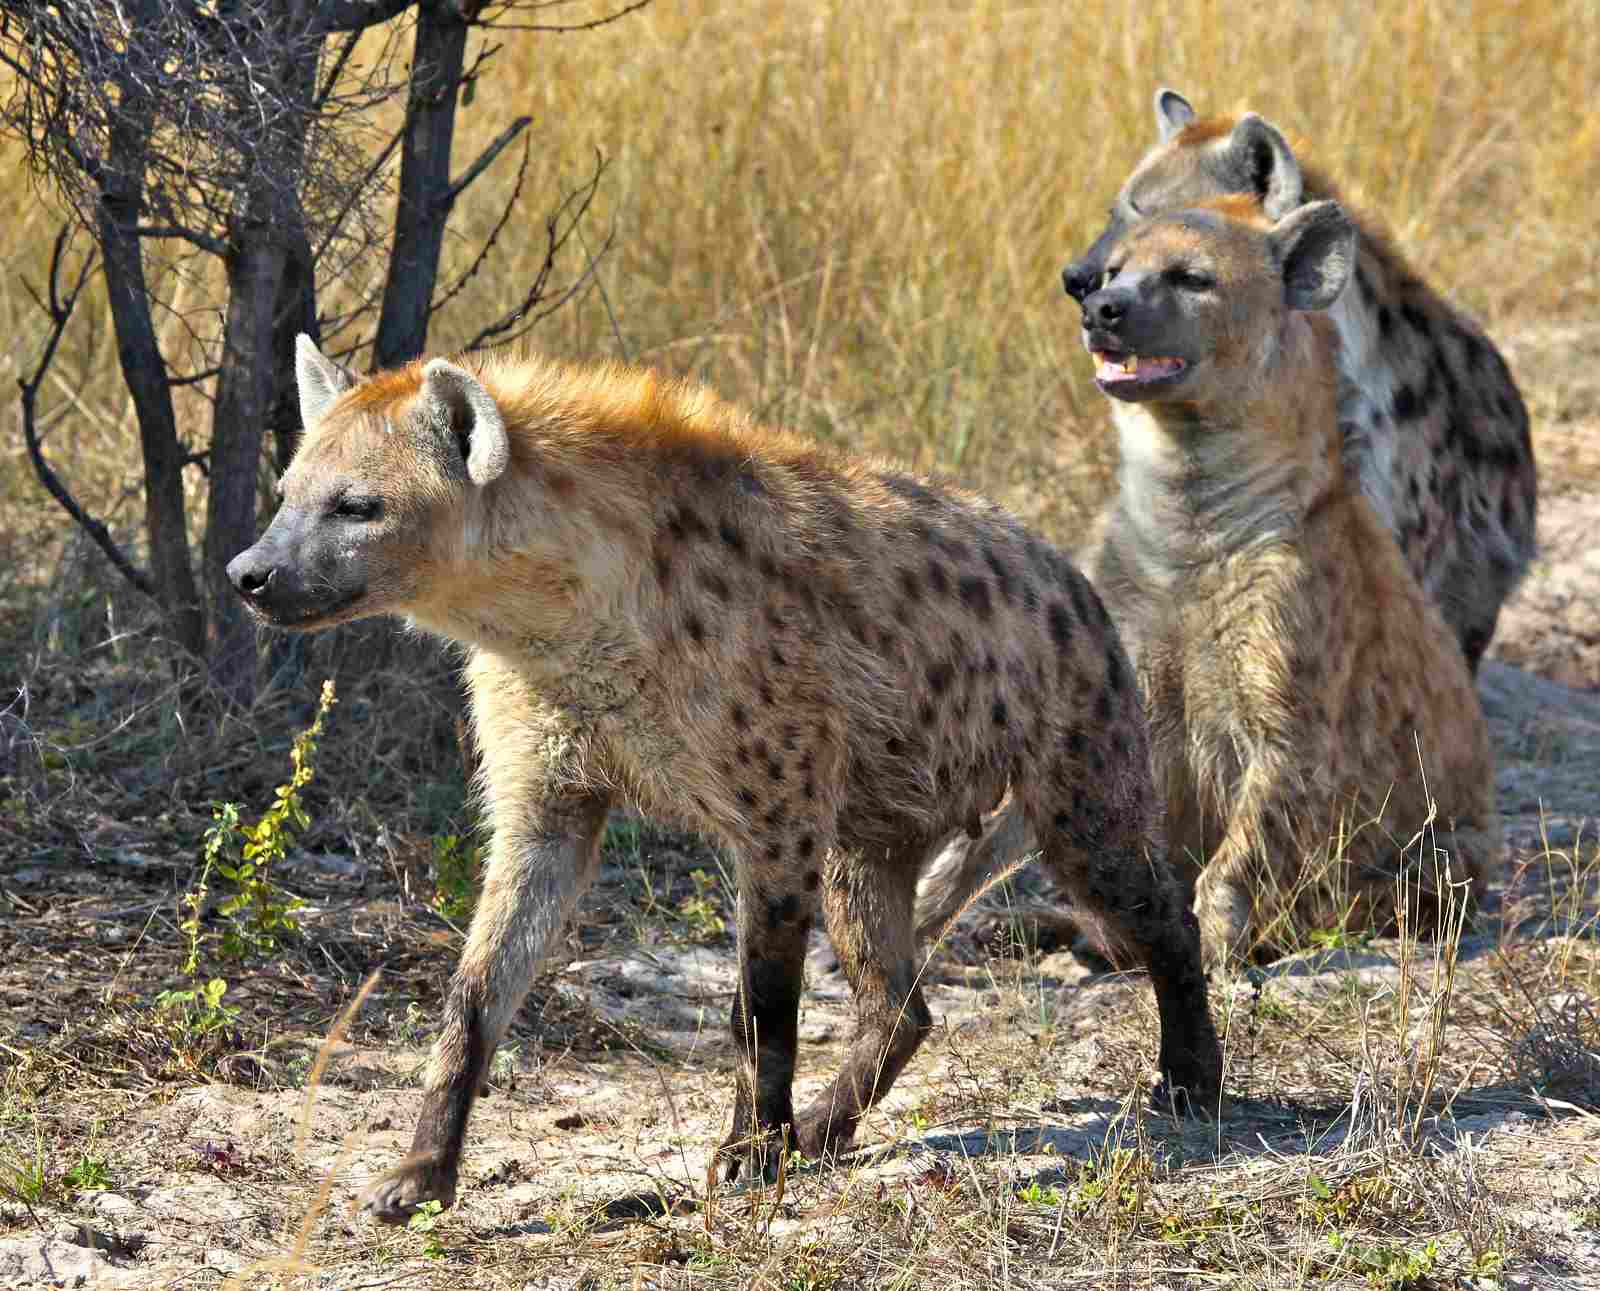 Hyena Vs Leopard: Cooperative Hunting Supports the Survival of Hyenas (Credit: Steve Jurvetson 2011 .CC BY 2.0.)